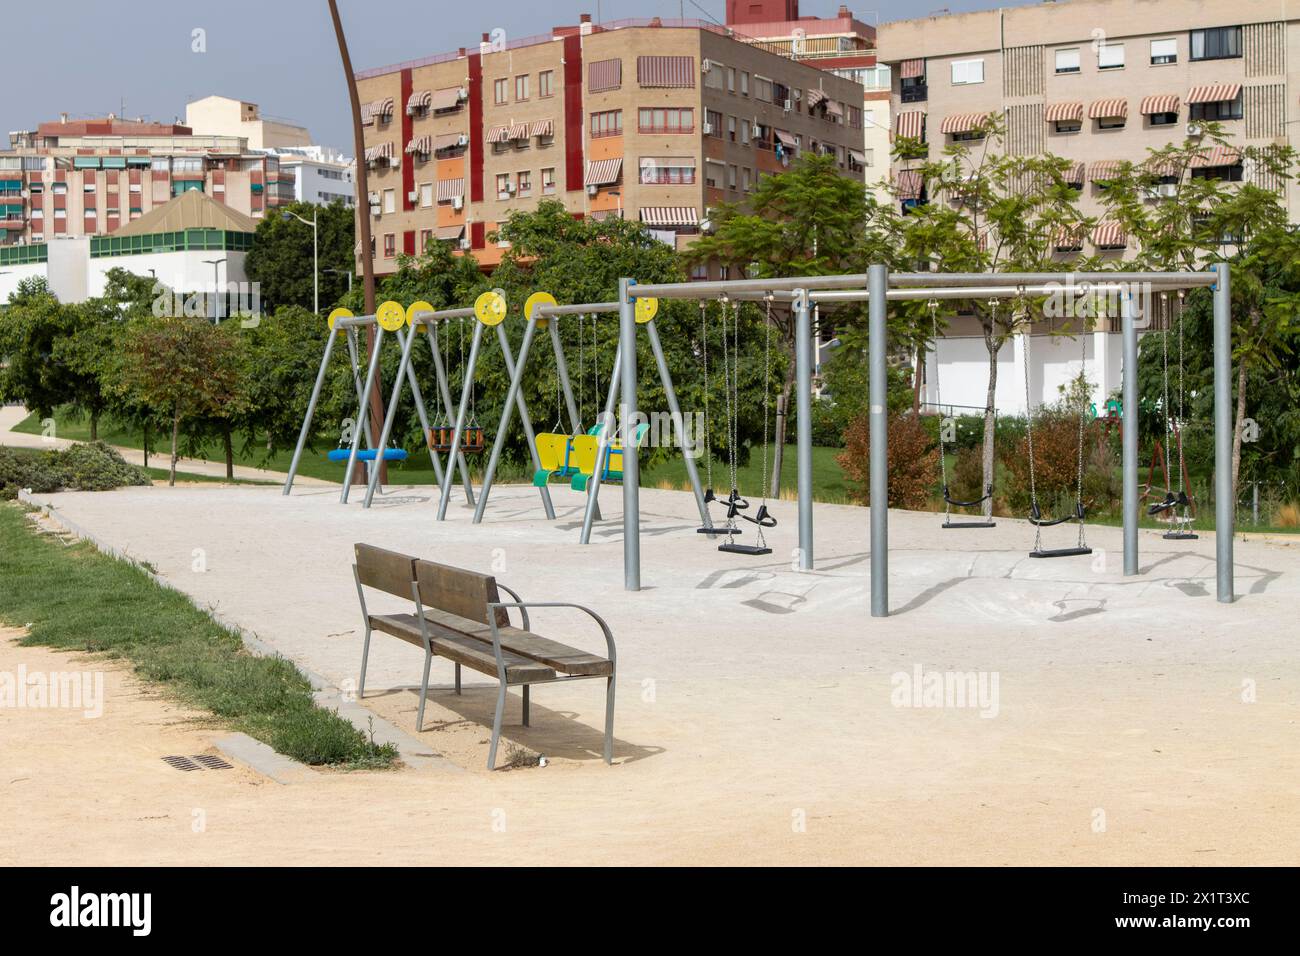 Empty swing set in a peaceful park with city backdrop. Stock Photo